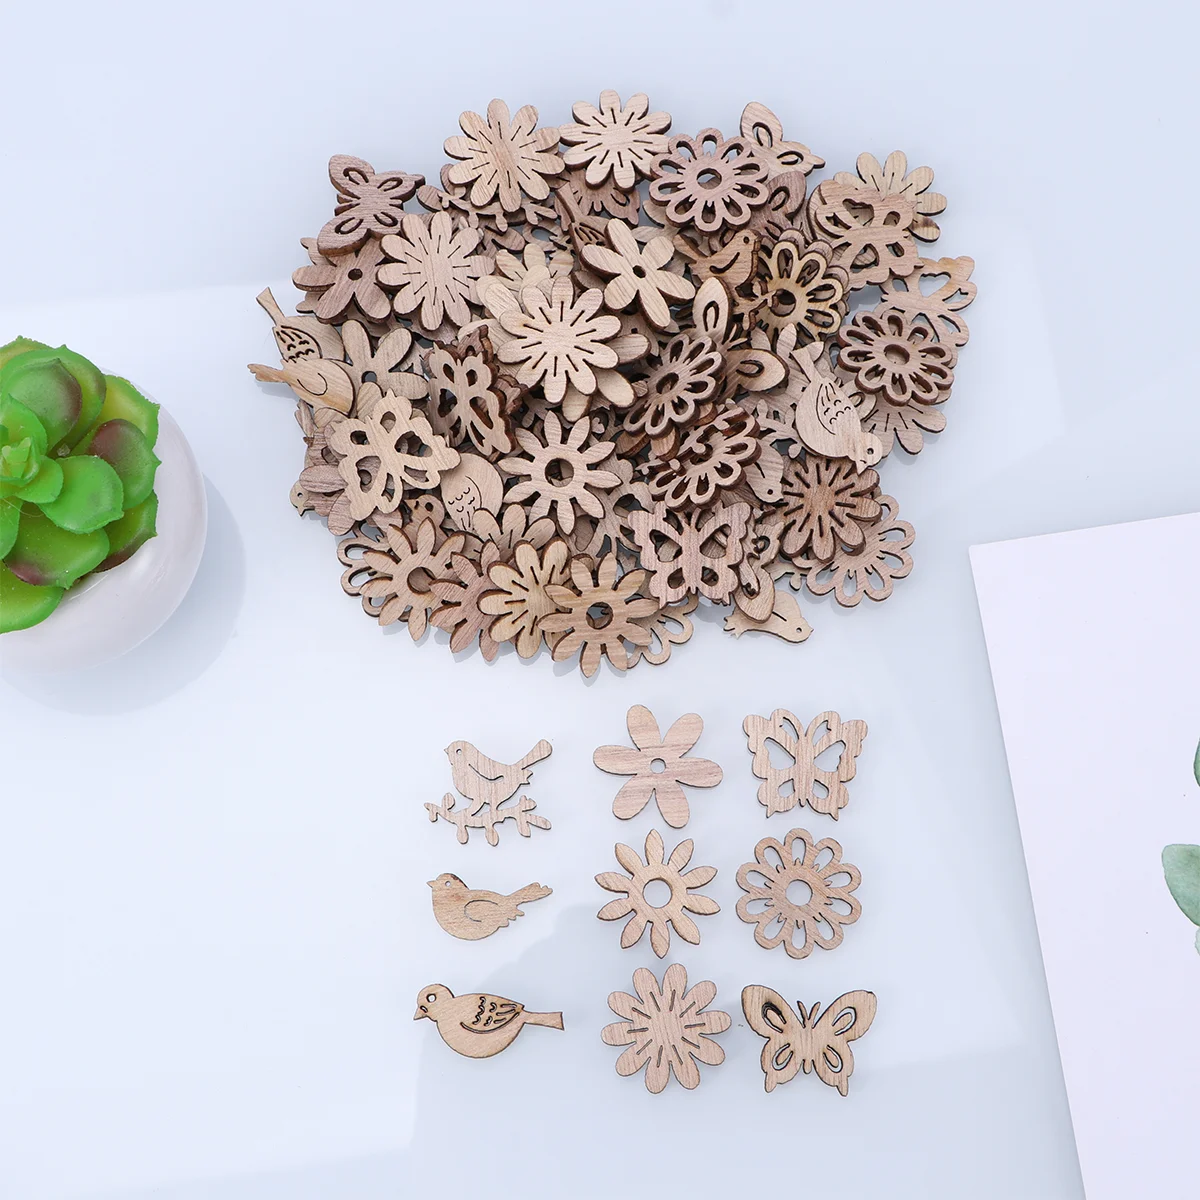 

Wood Wooden Cutouts Craft Unfinished Shapes Pieces Crafts Diy Christmas Flower Slices Embellishments Blank Tag Ornaments Table